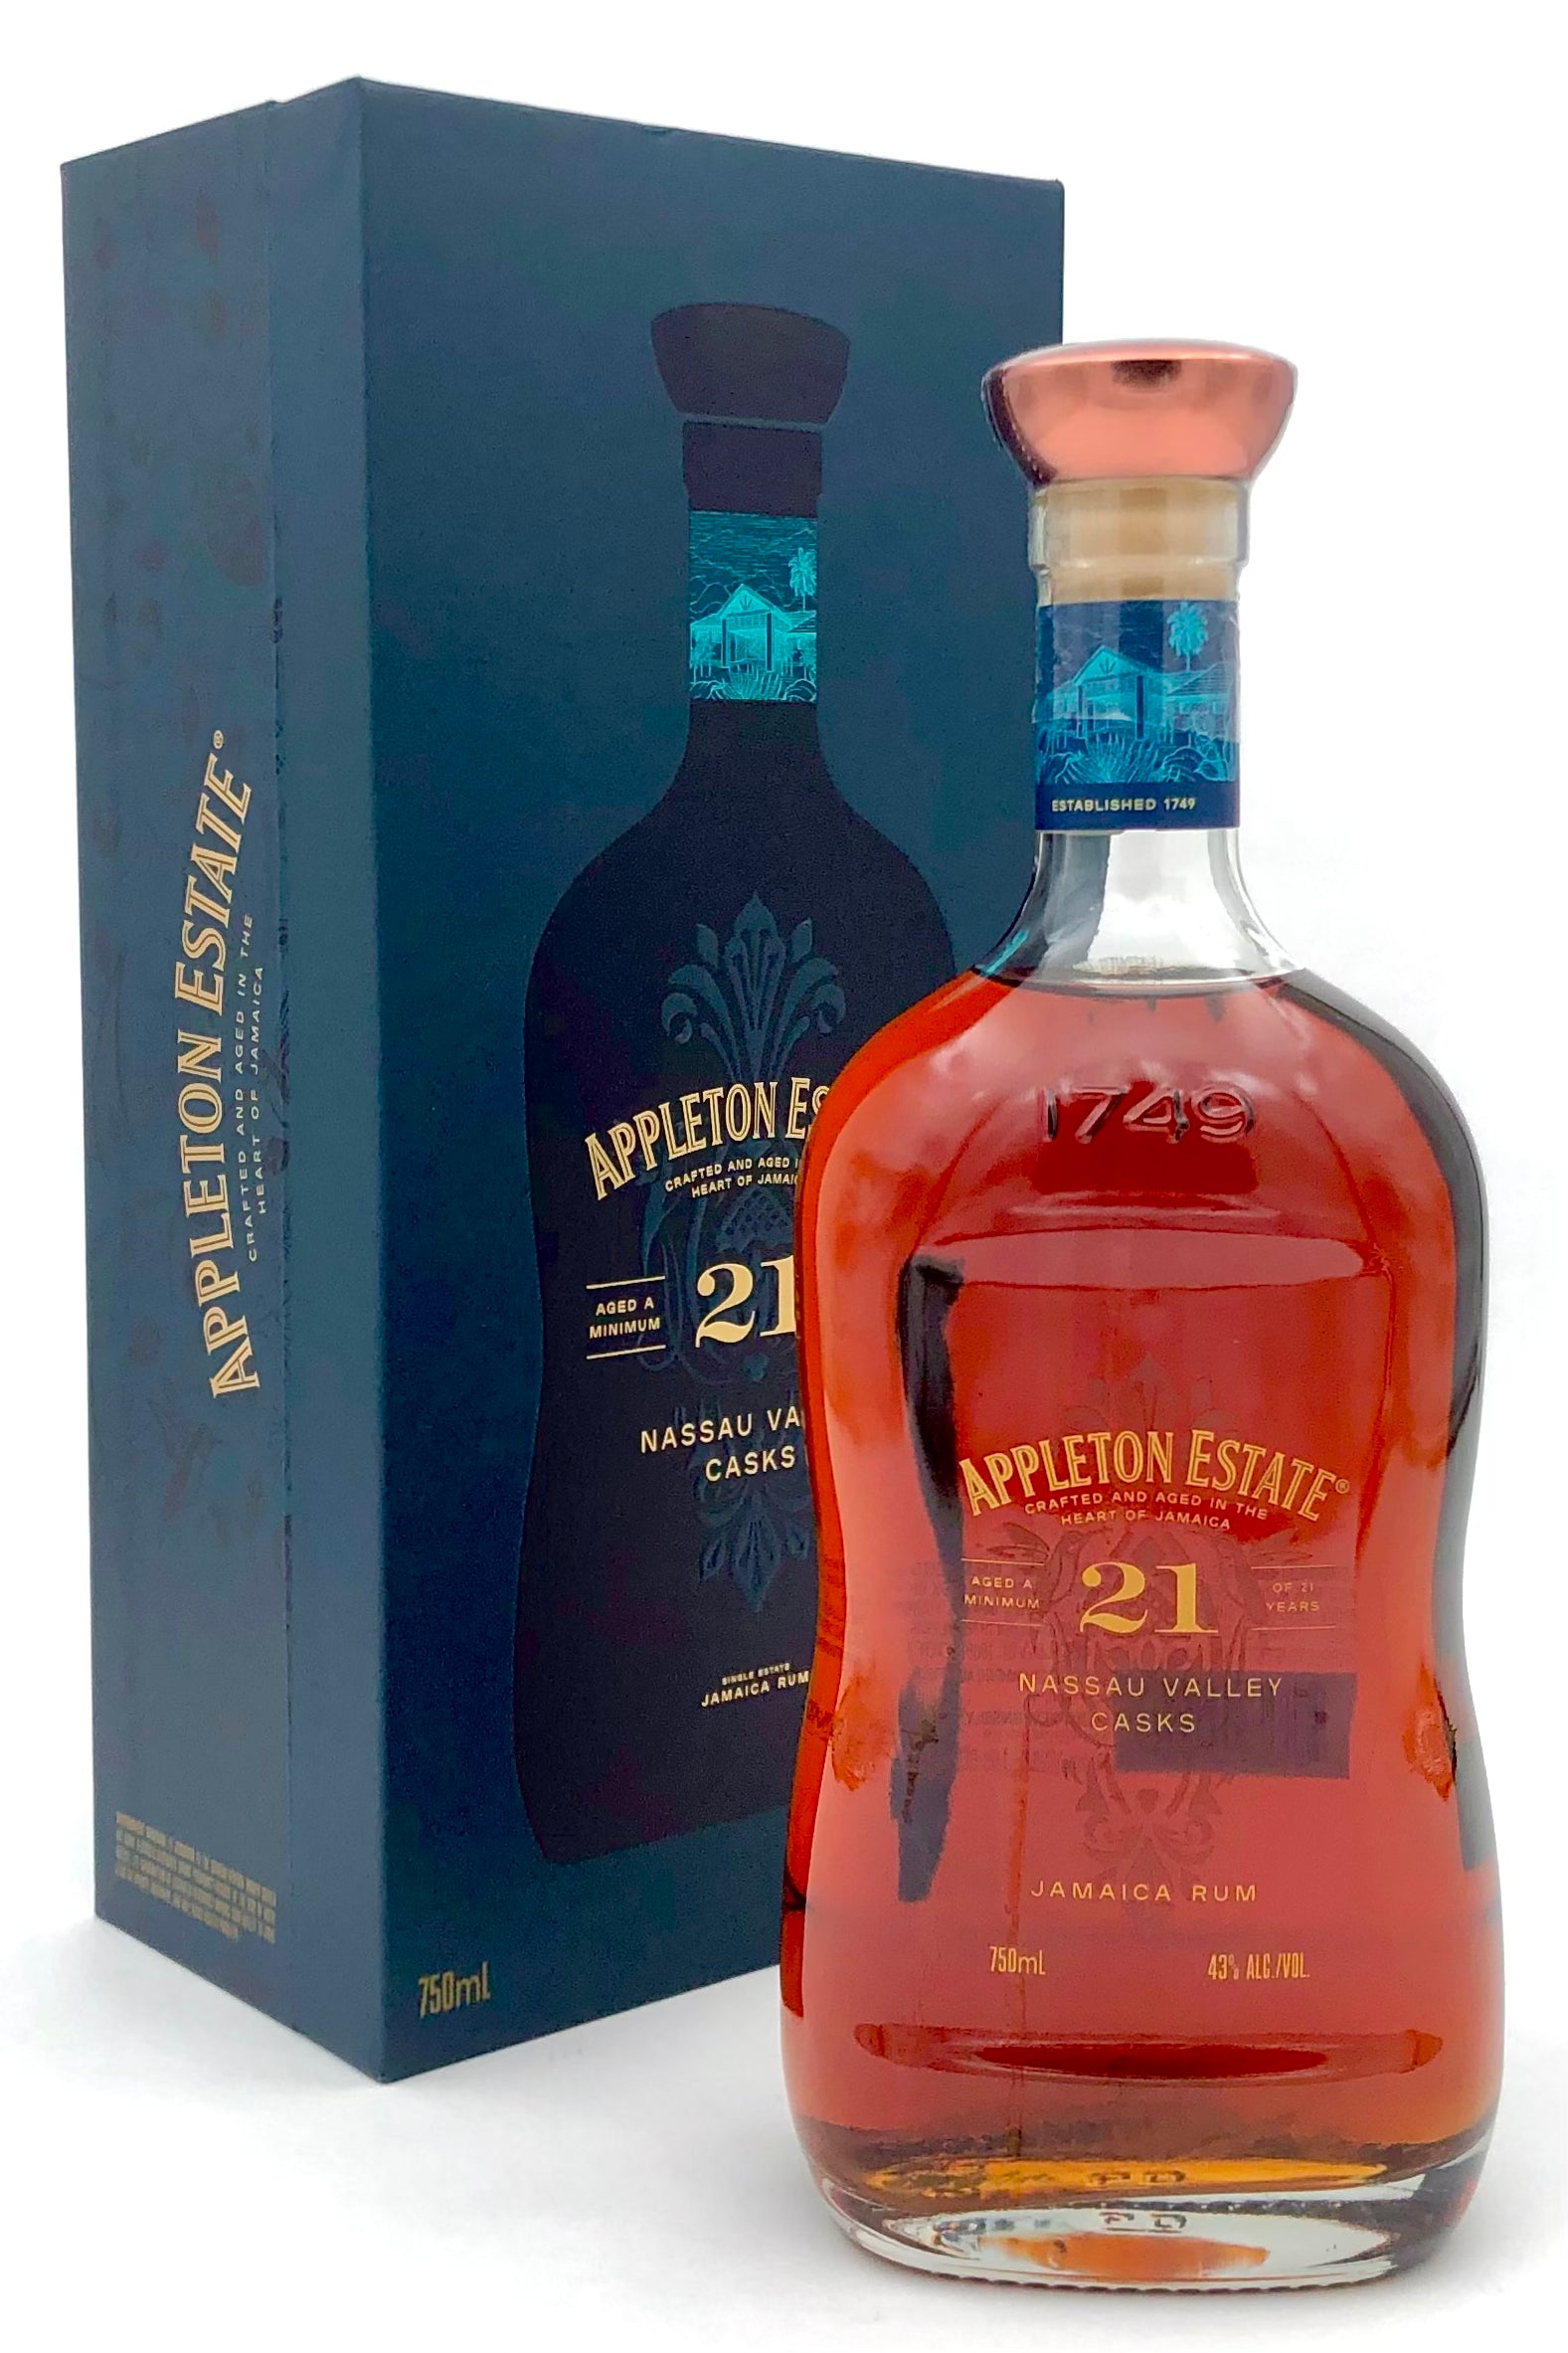 Gouverneur 1648 10 Year Old XO Rum 700ml - Old Town Tequila